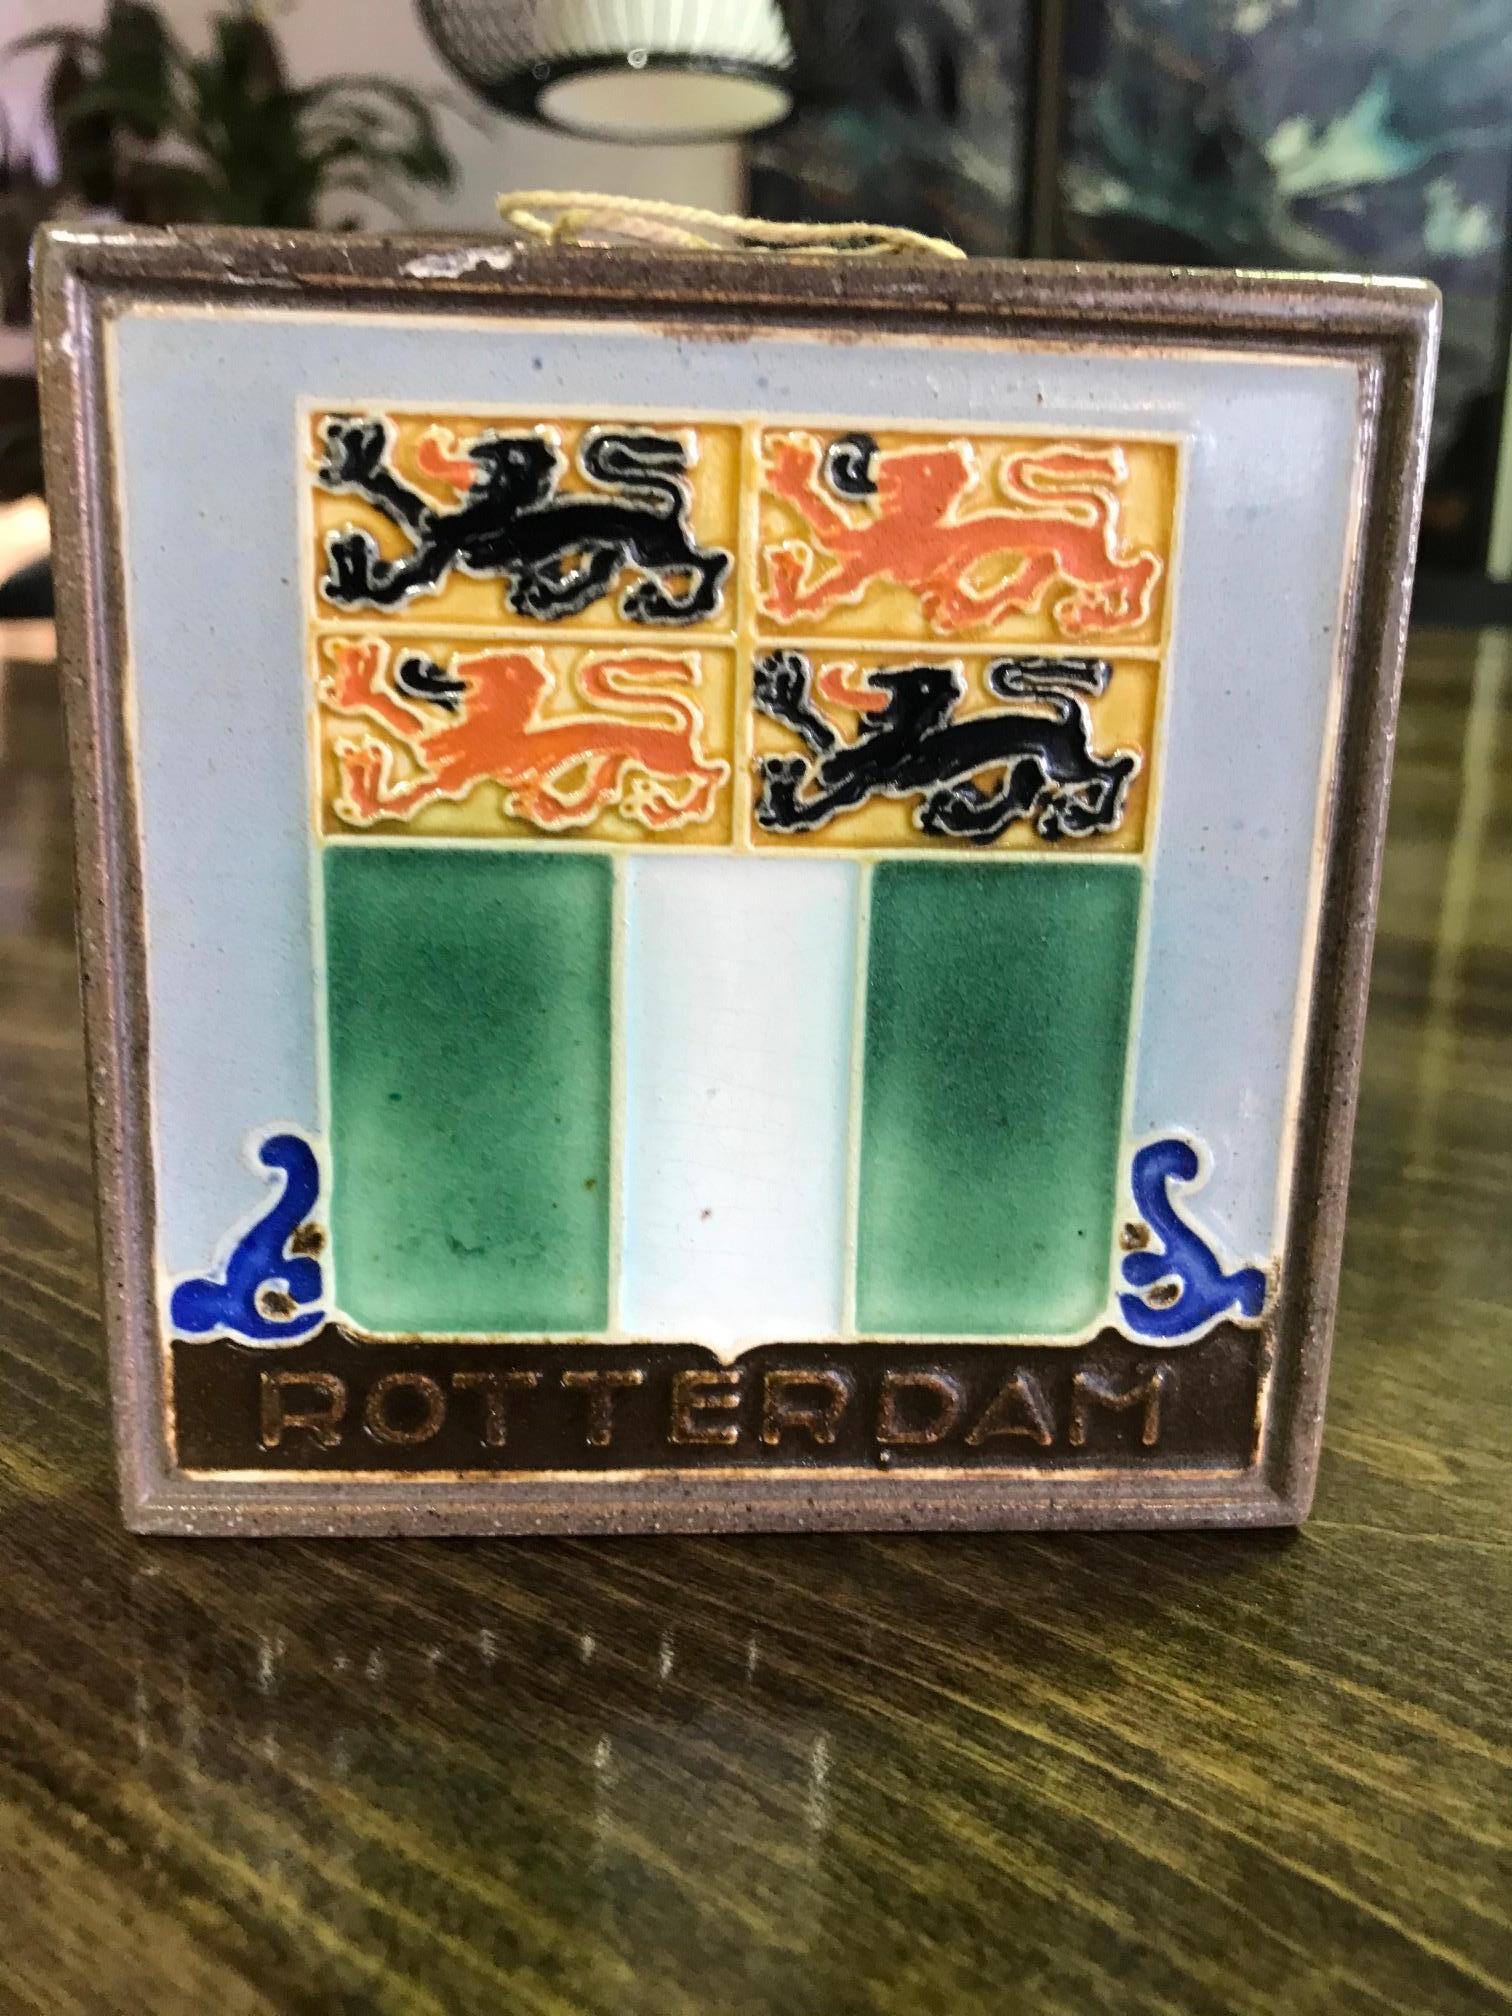 A colorful tile made by delft in the Netherlands.

Stamped 